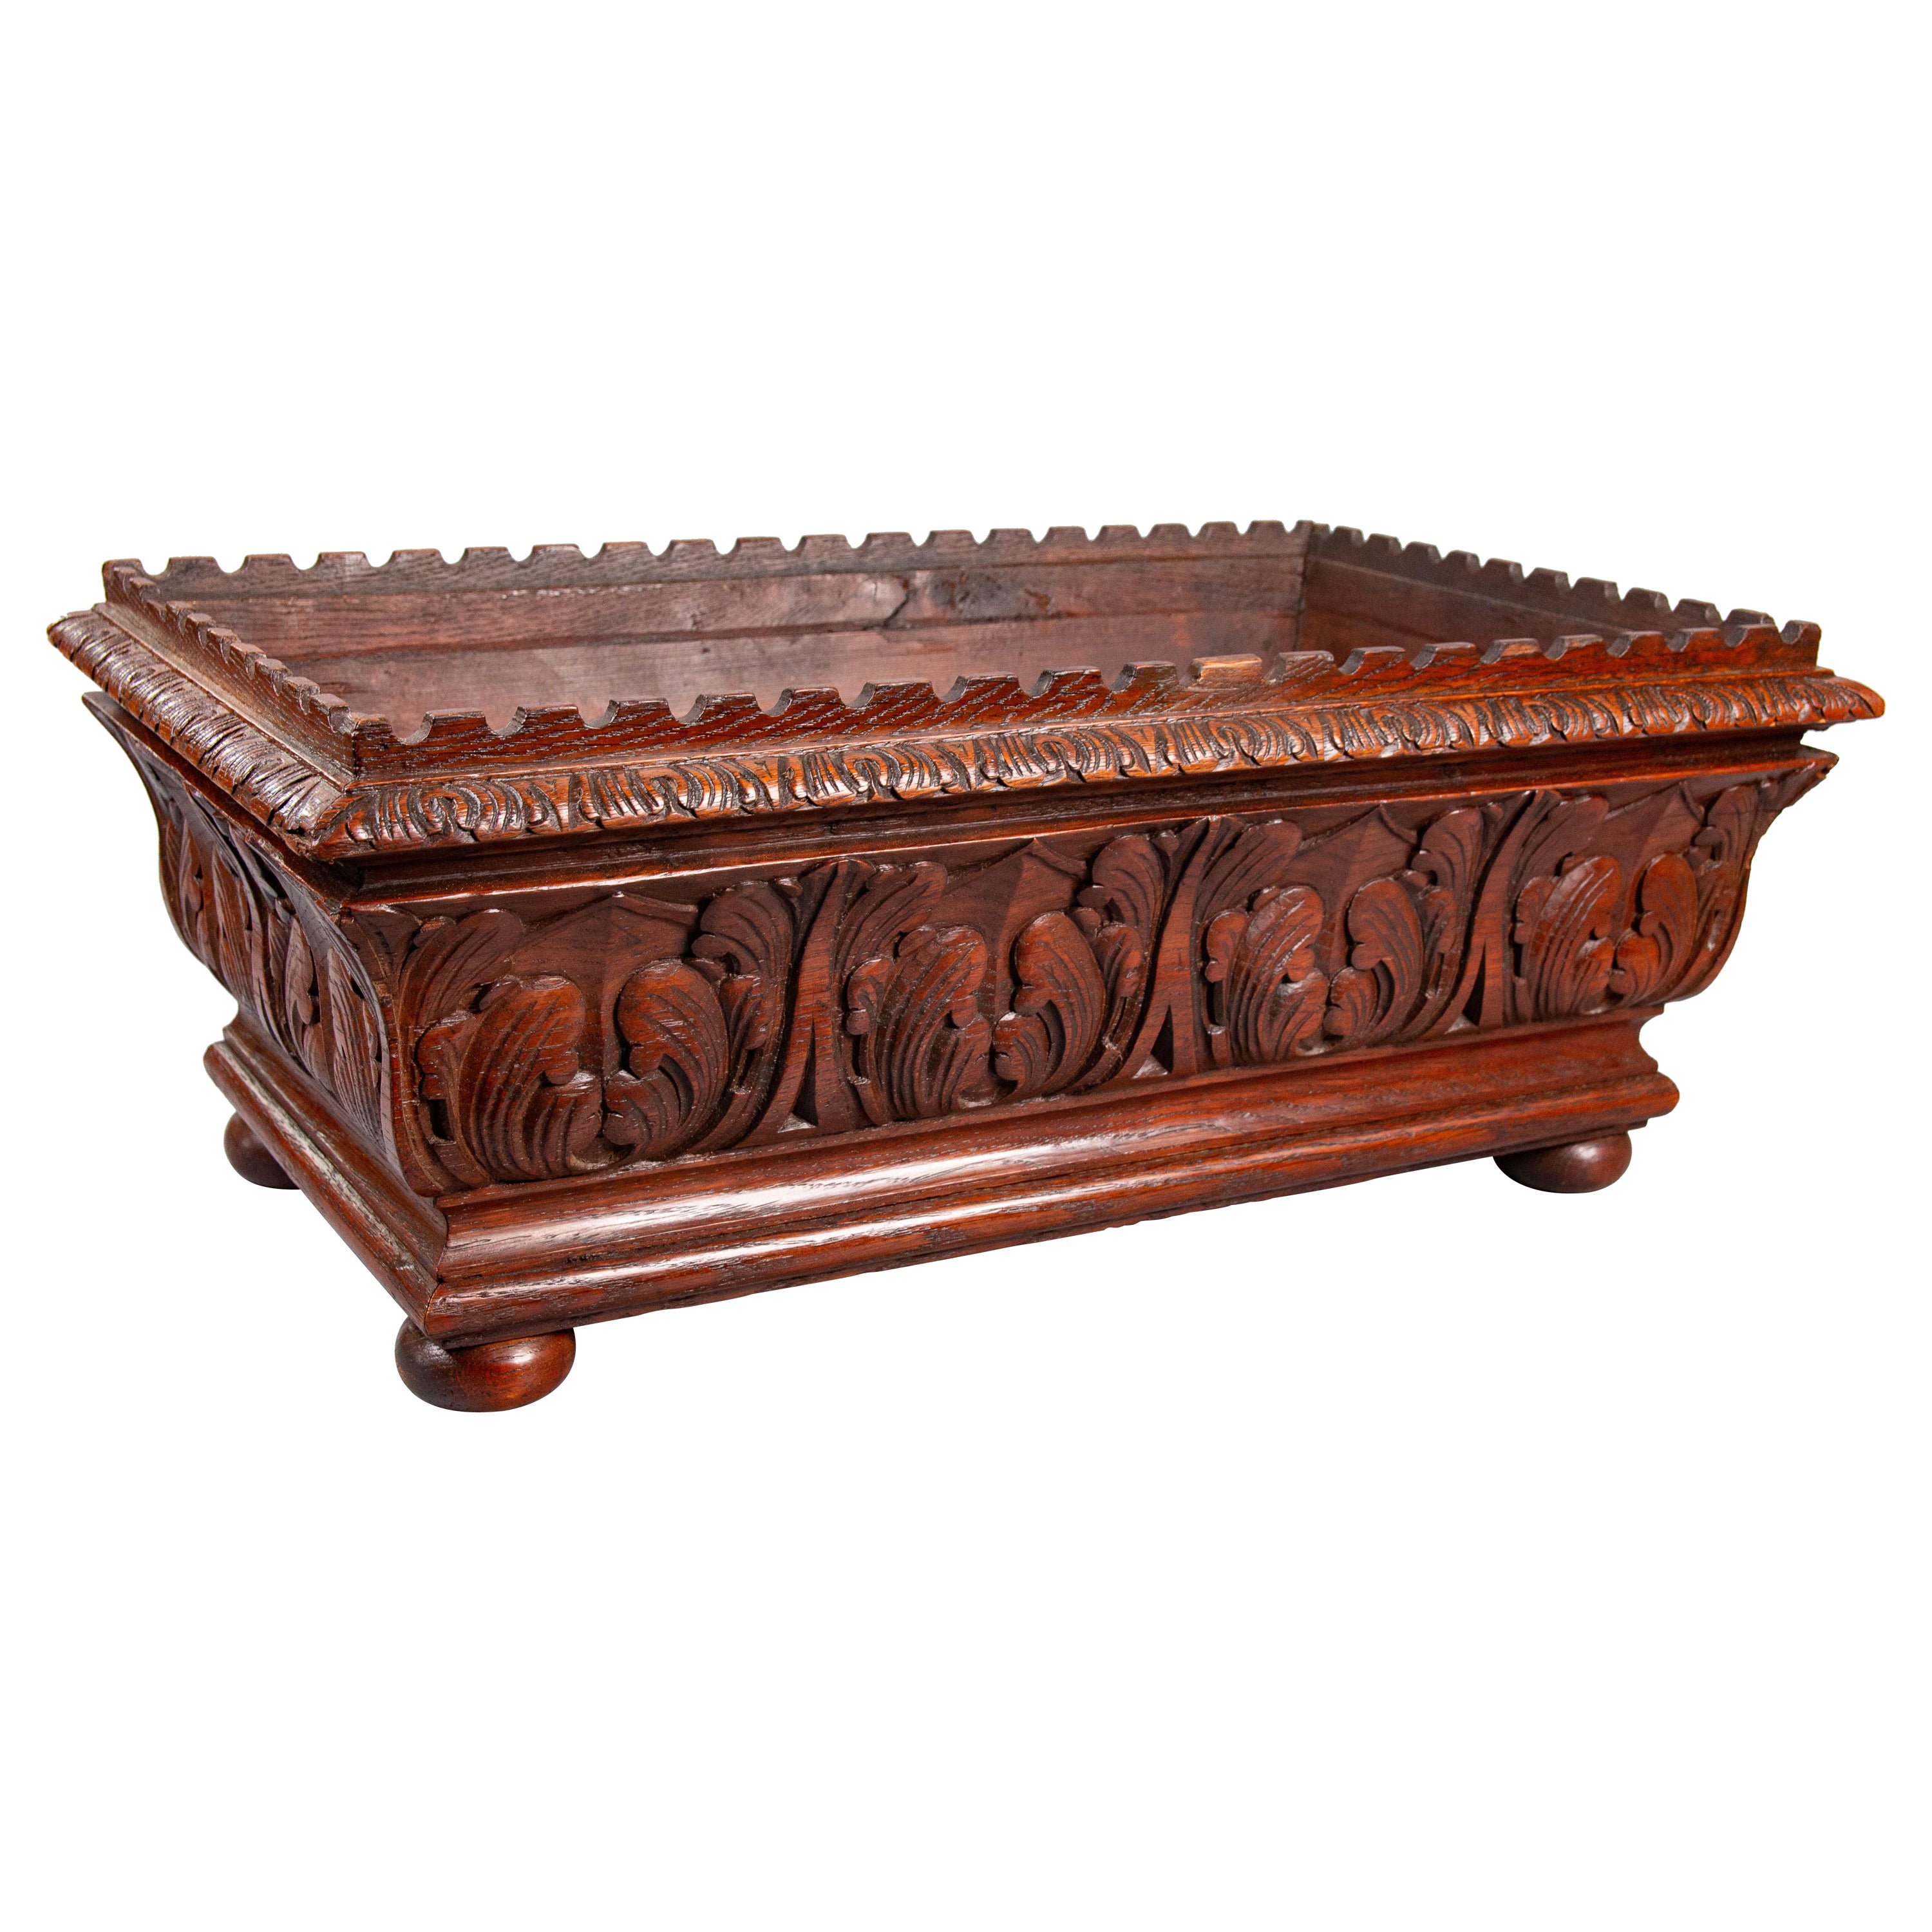 Antique 19th-Century French Mahogany Carved Jardiniere Planter For Sale